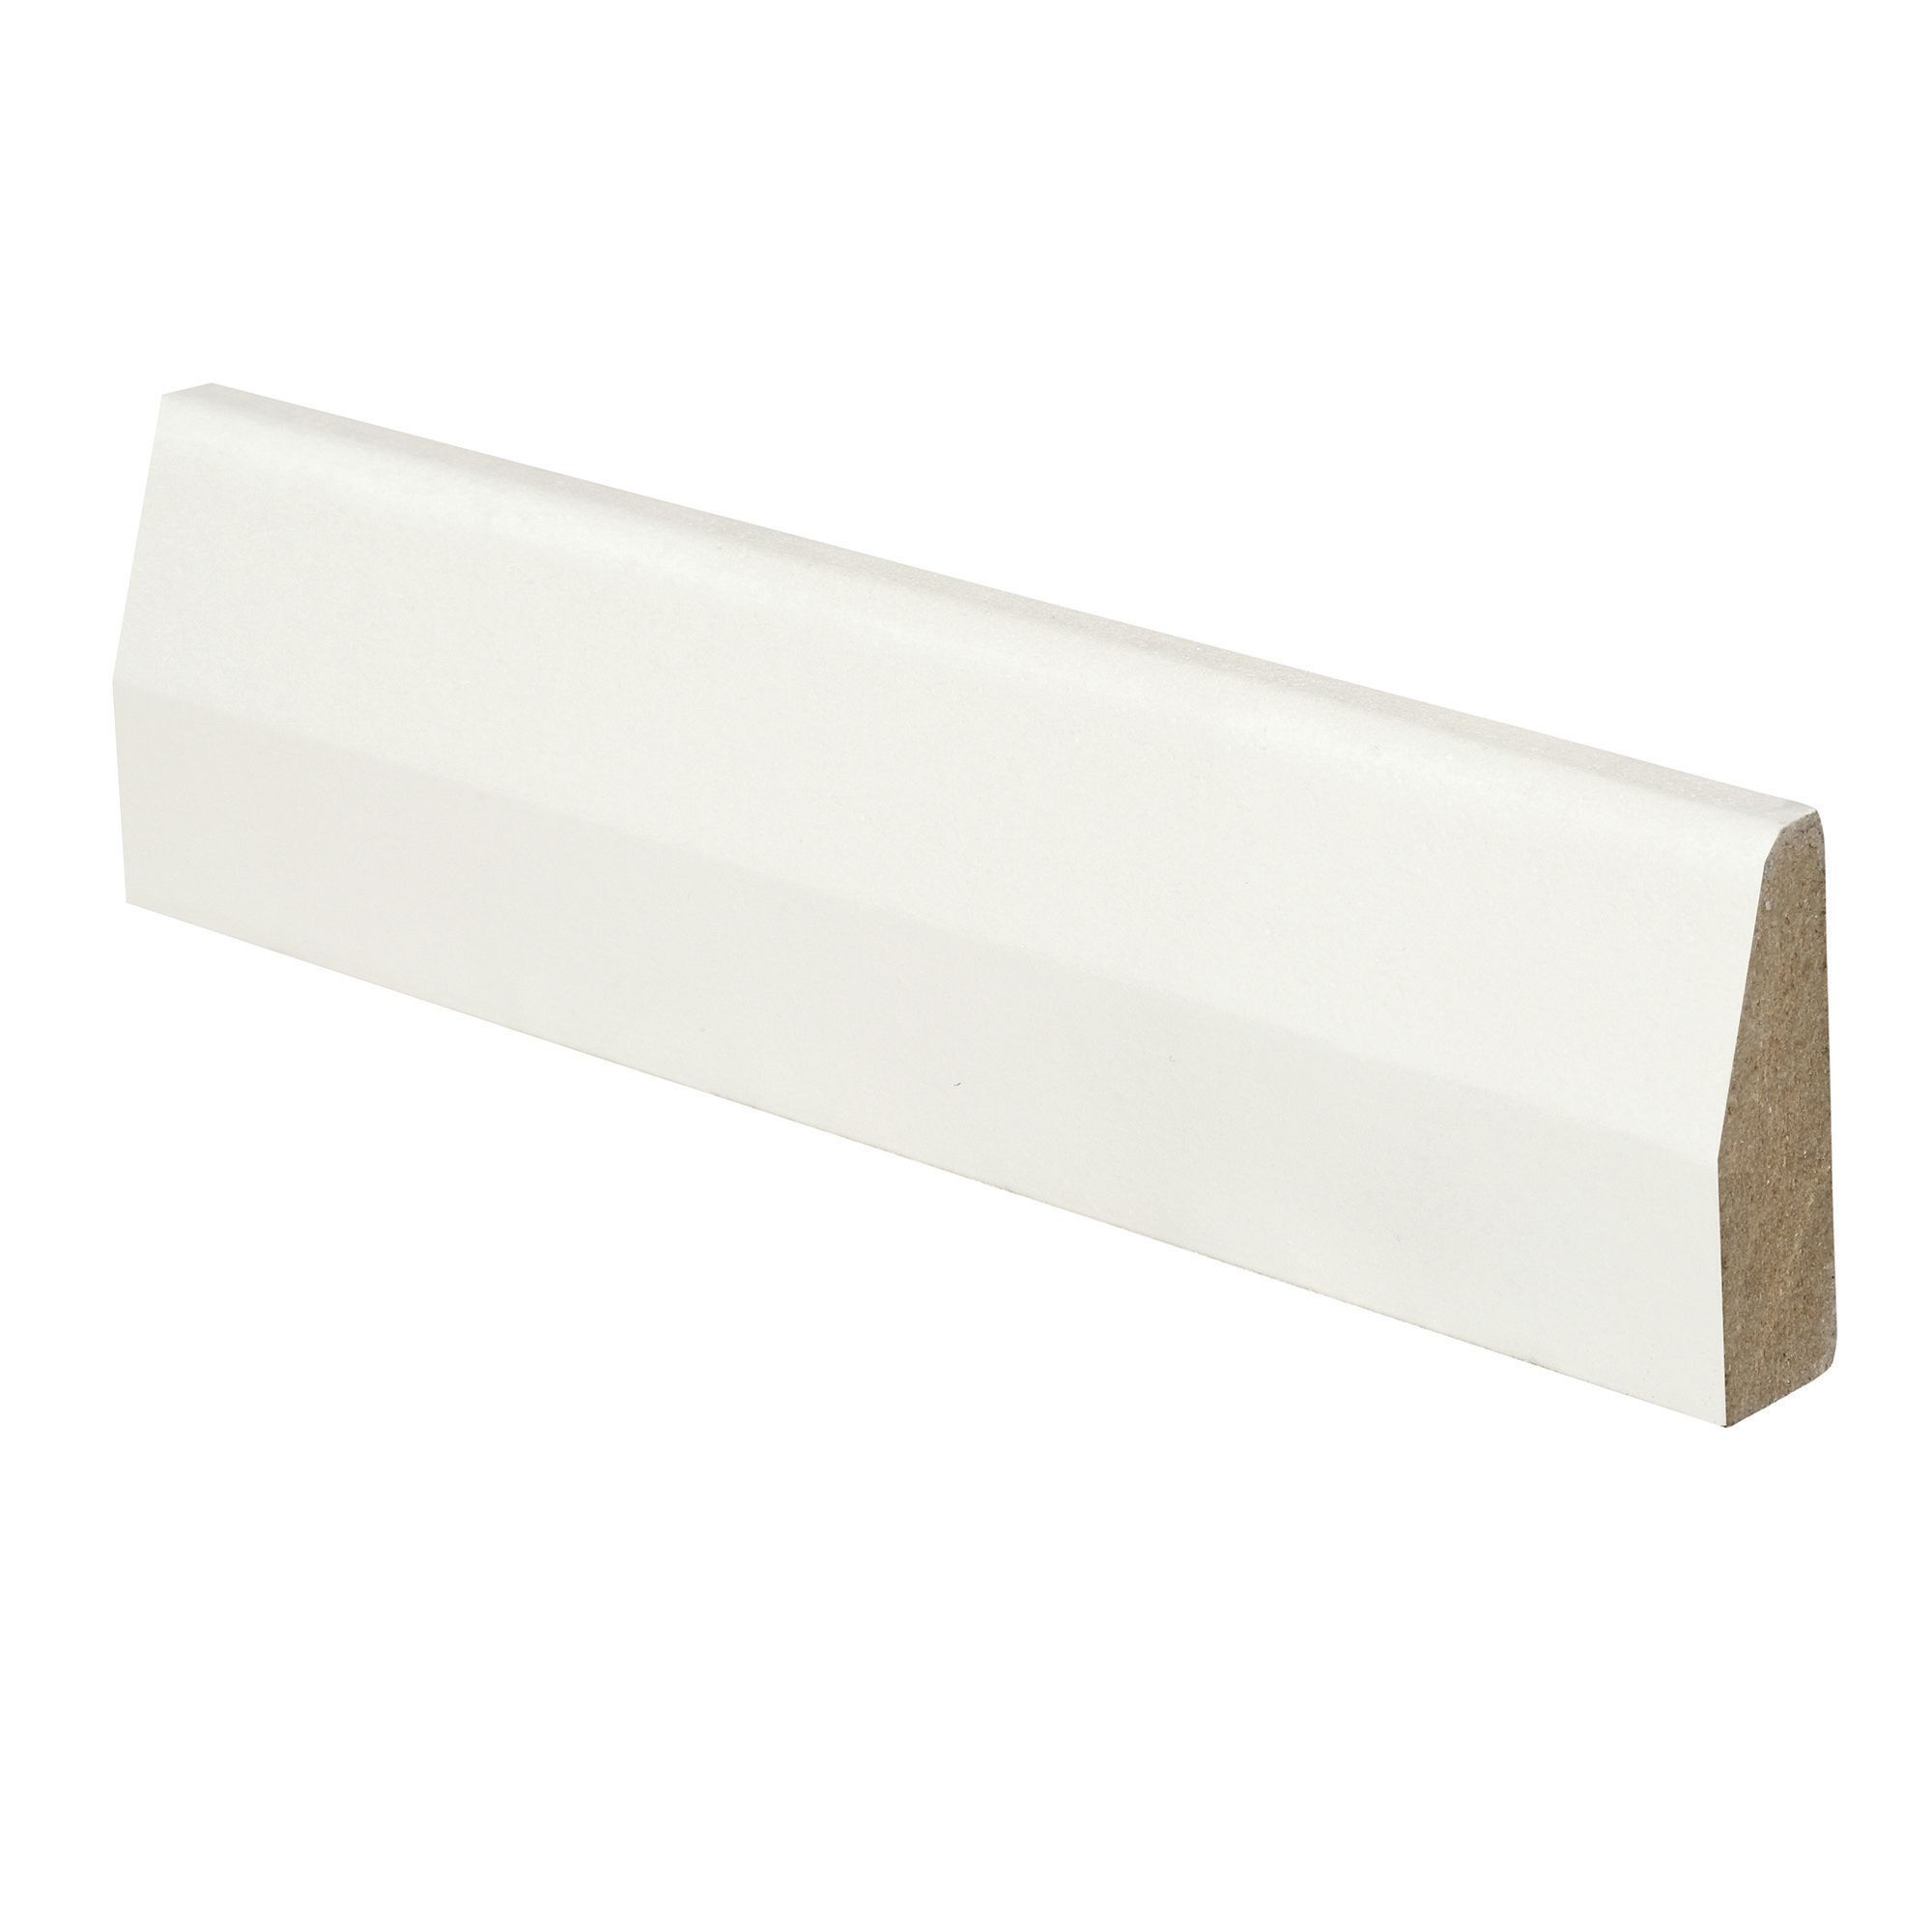 Image of Wickes Chamfered Fully Finished MDF Architrave - 14.5mm x 44mm x 2.1m Pack of 5